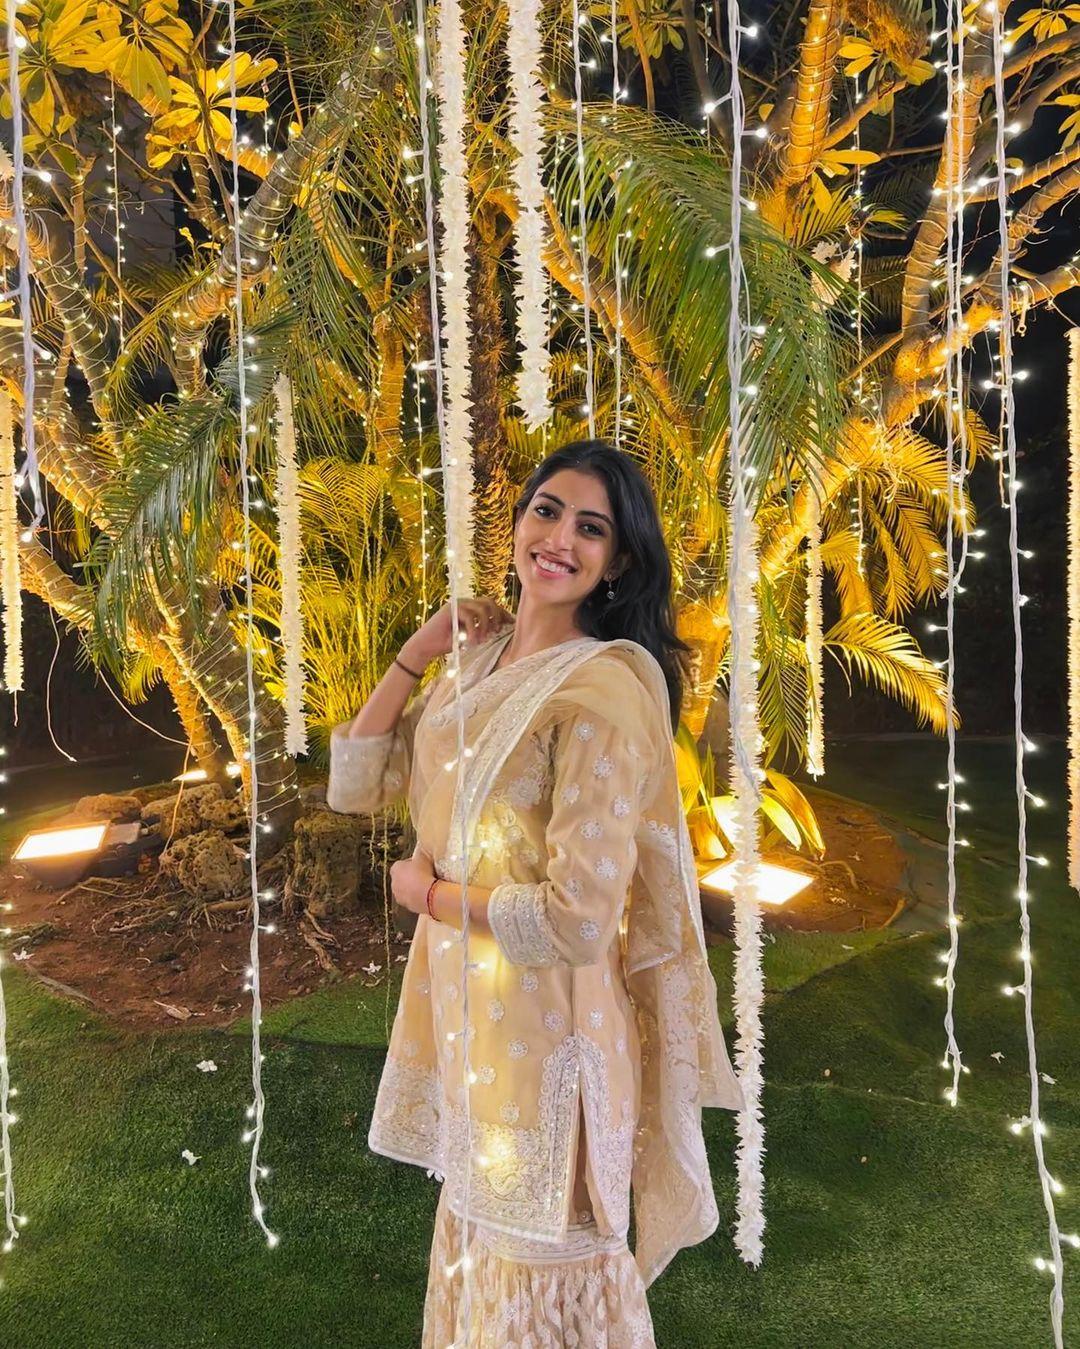 Don't want to wear a heavy saree? Worry not, Navya's wardrobe has options for you as well. In this pretty princess look, she wore a beautiful light yellow-colored chikankari suit paired with matching palazzo pants and dupatta